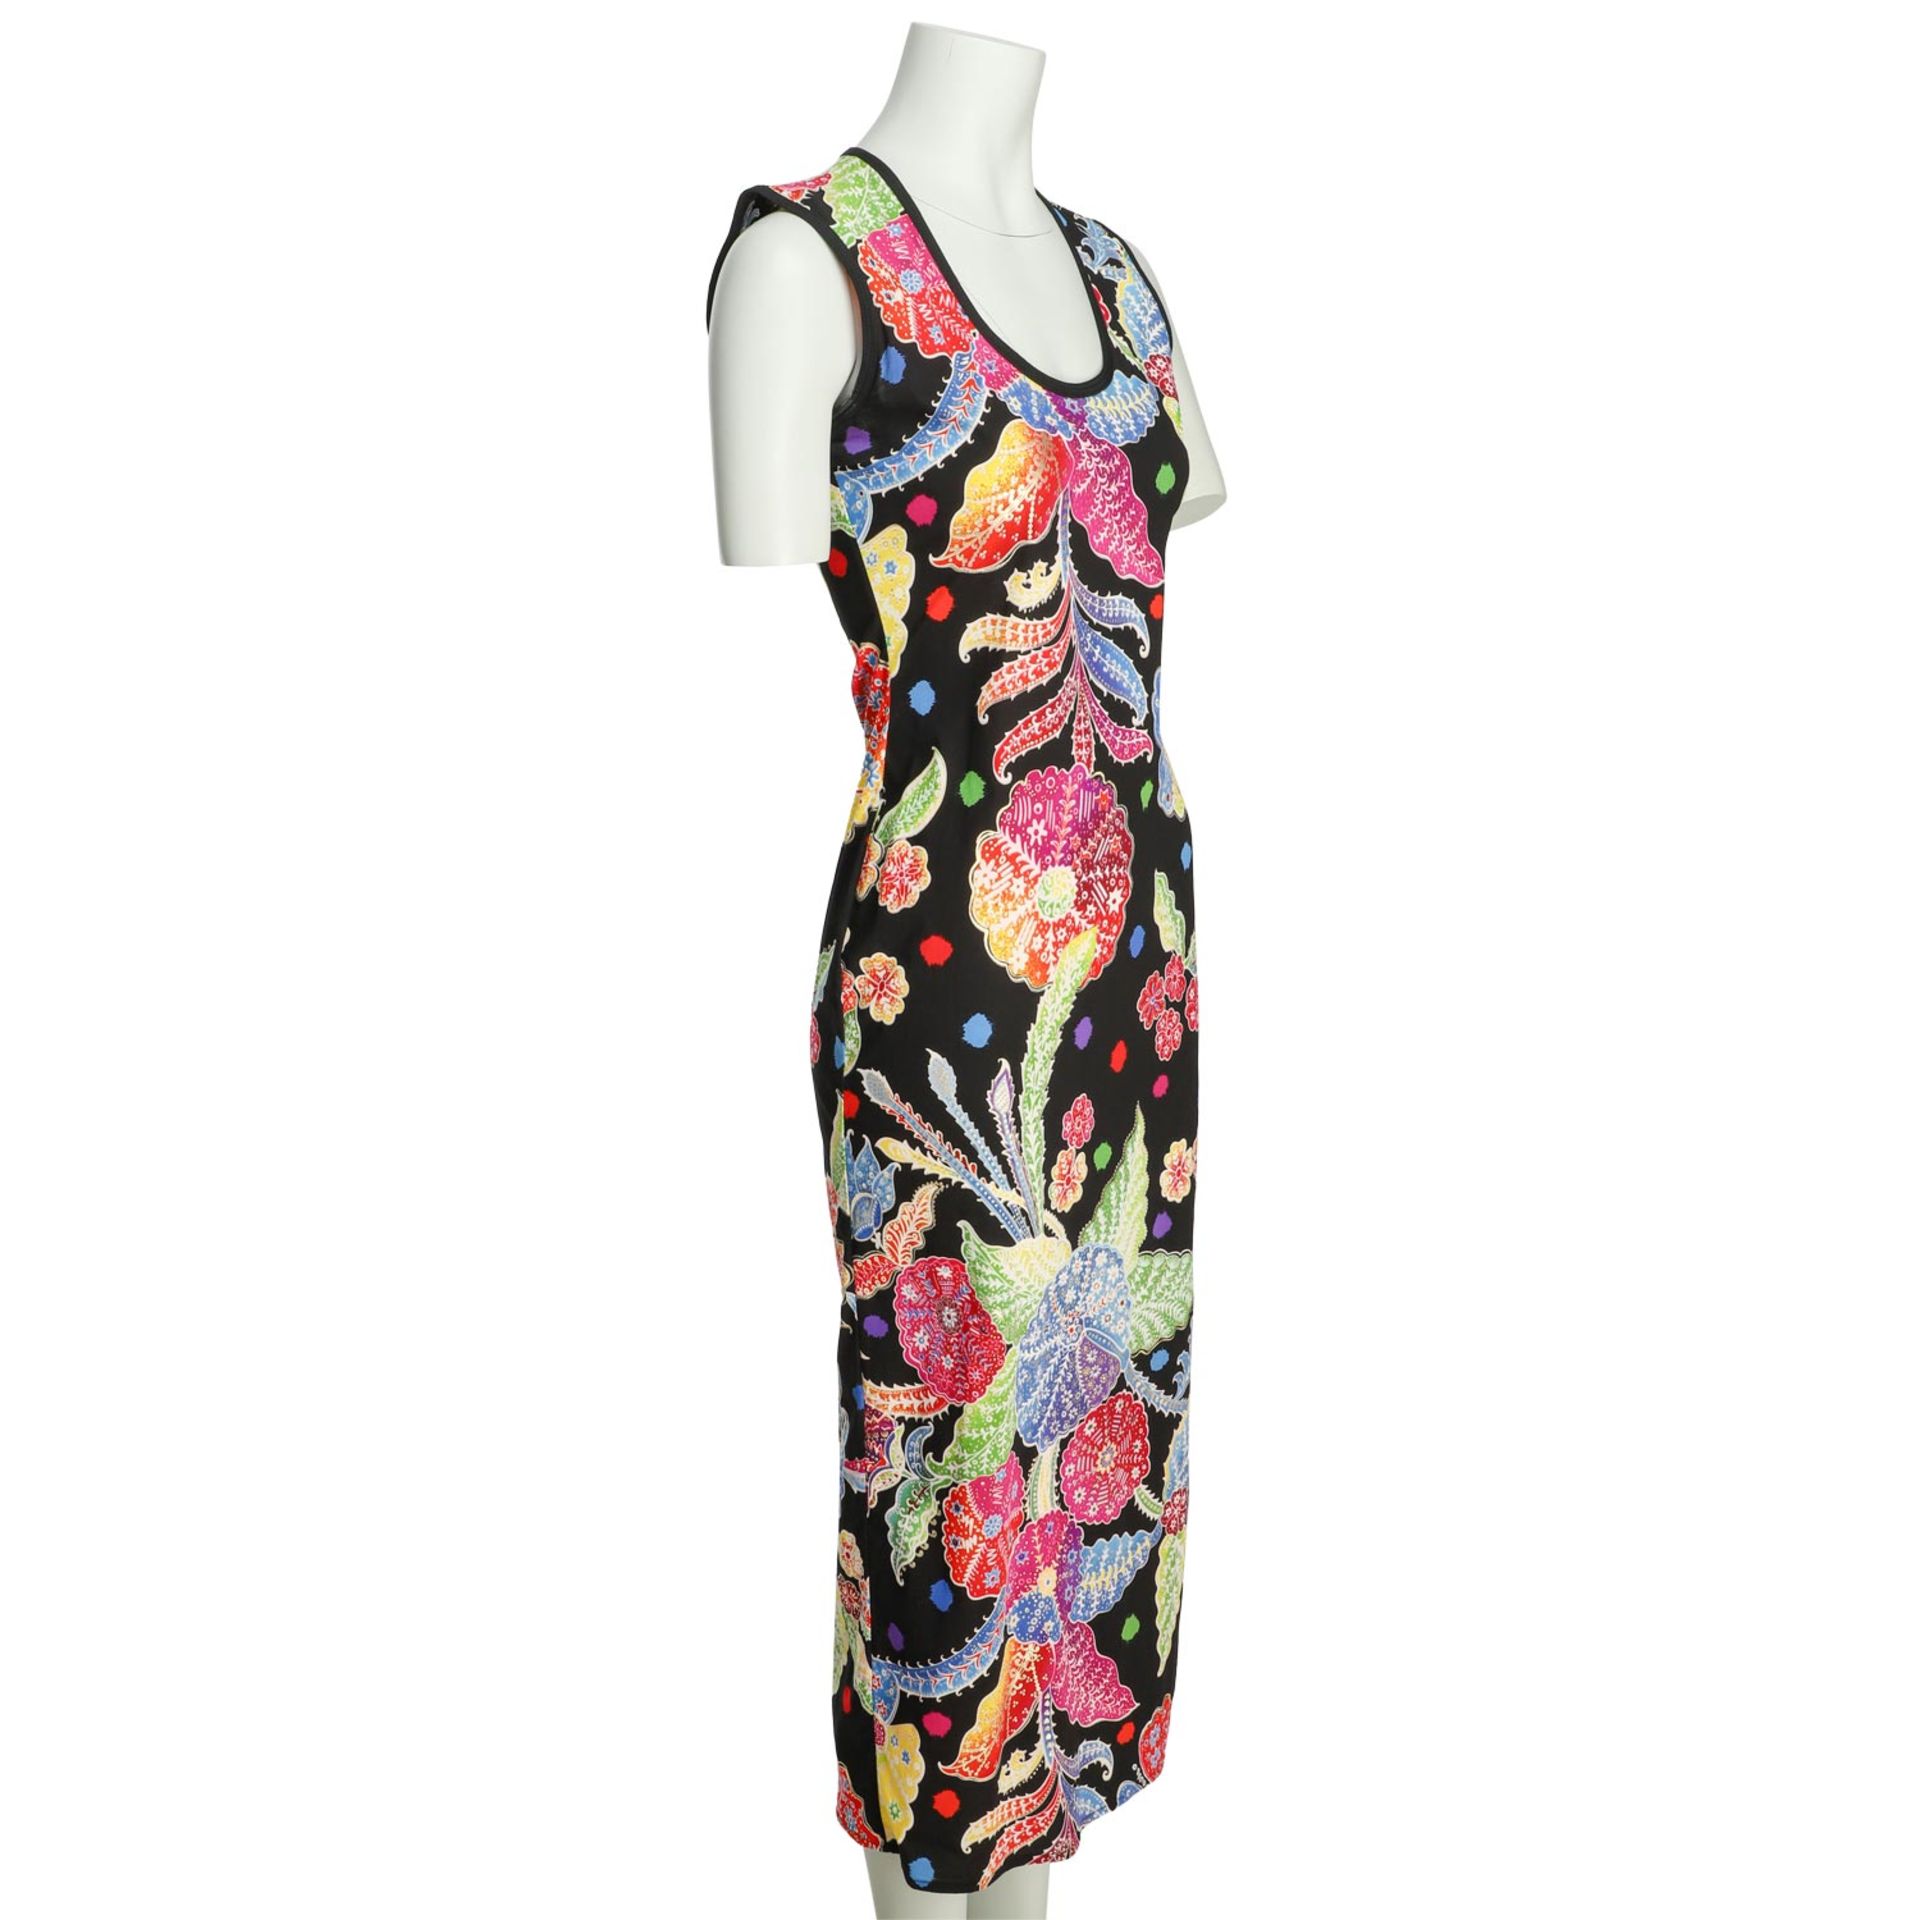 GIANNI VERSACE COUTURE VINTAGE Kleid, Gr.ca. 36, Koll.: F/W 1993/94 Mailand. - Image 2 of 4